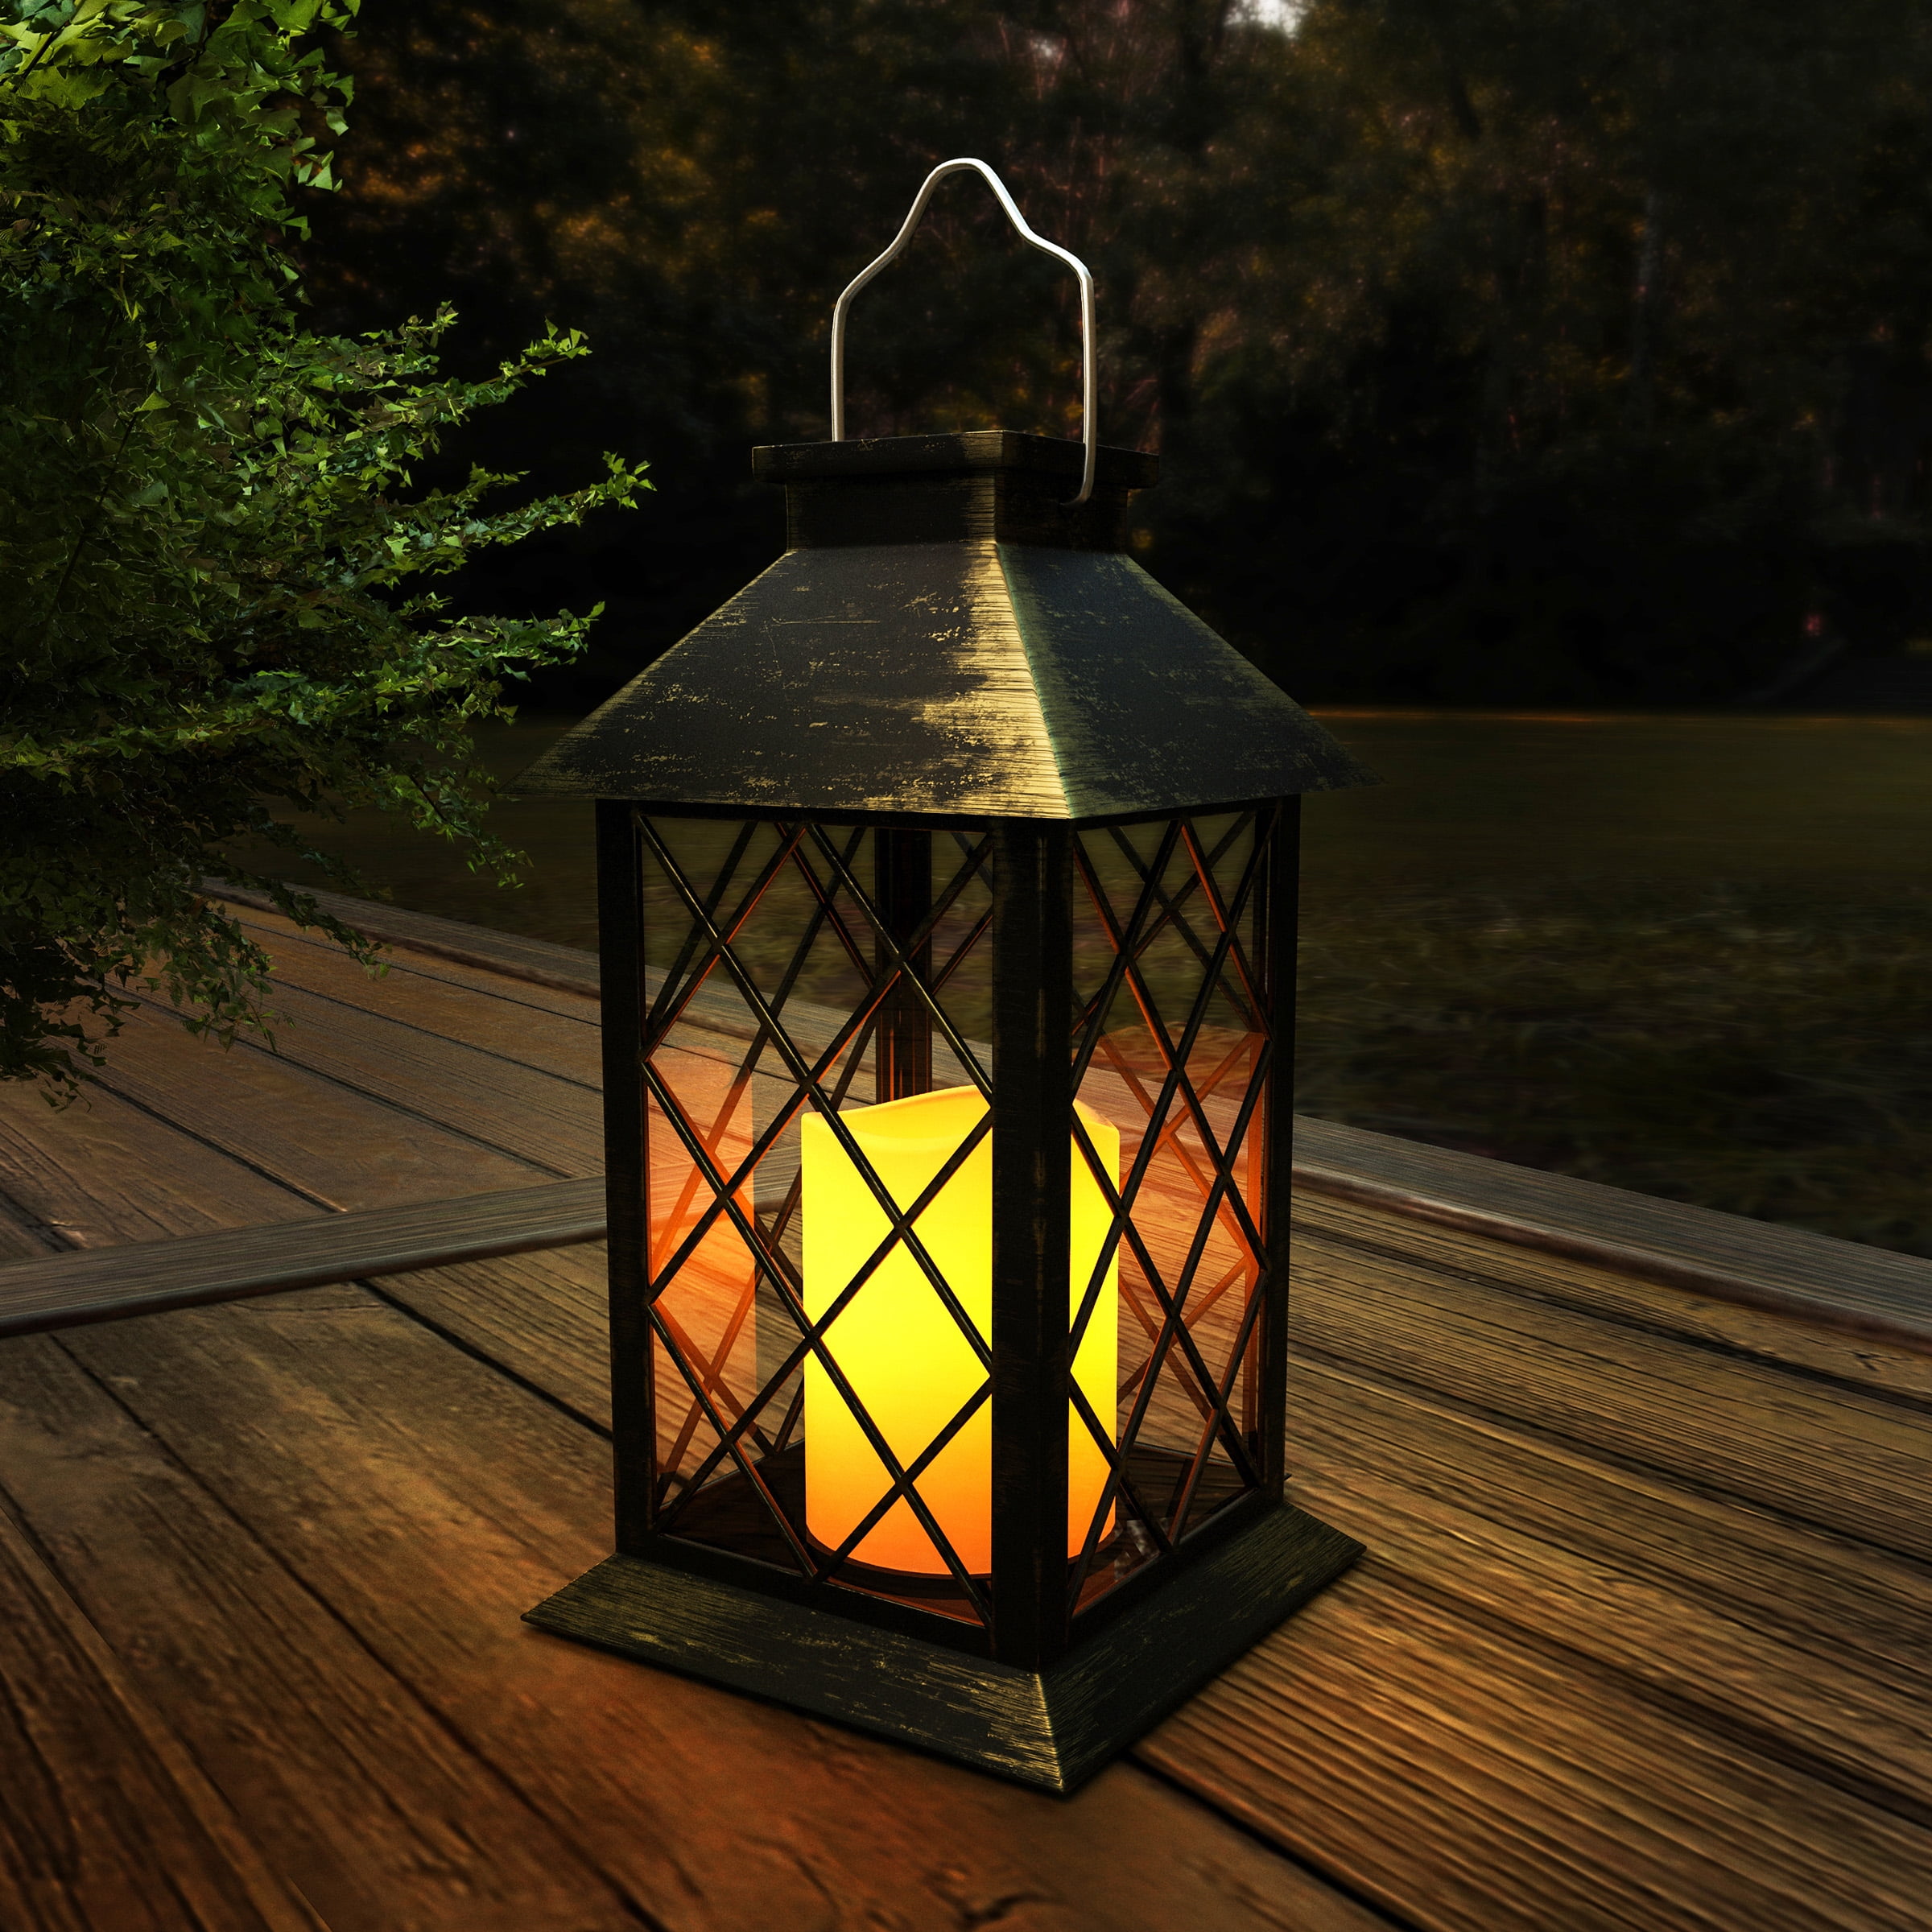 Solar LED Mission Lantern Handheld Lamp Candle Light Dinner Outdoor Patio Table 